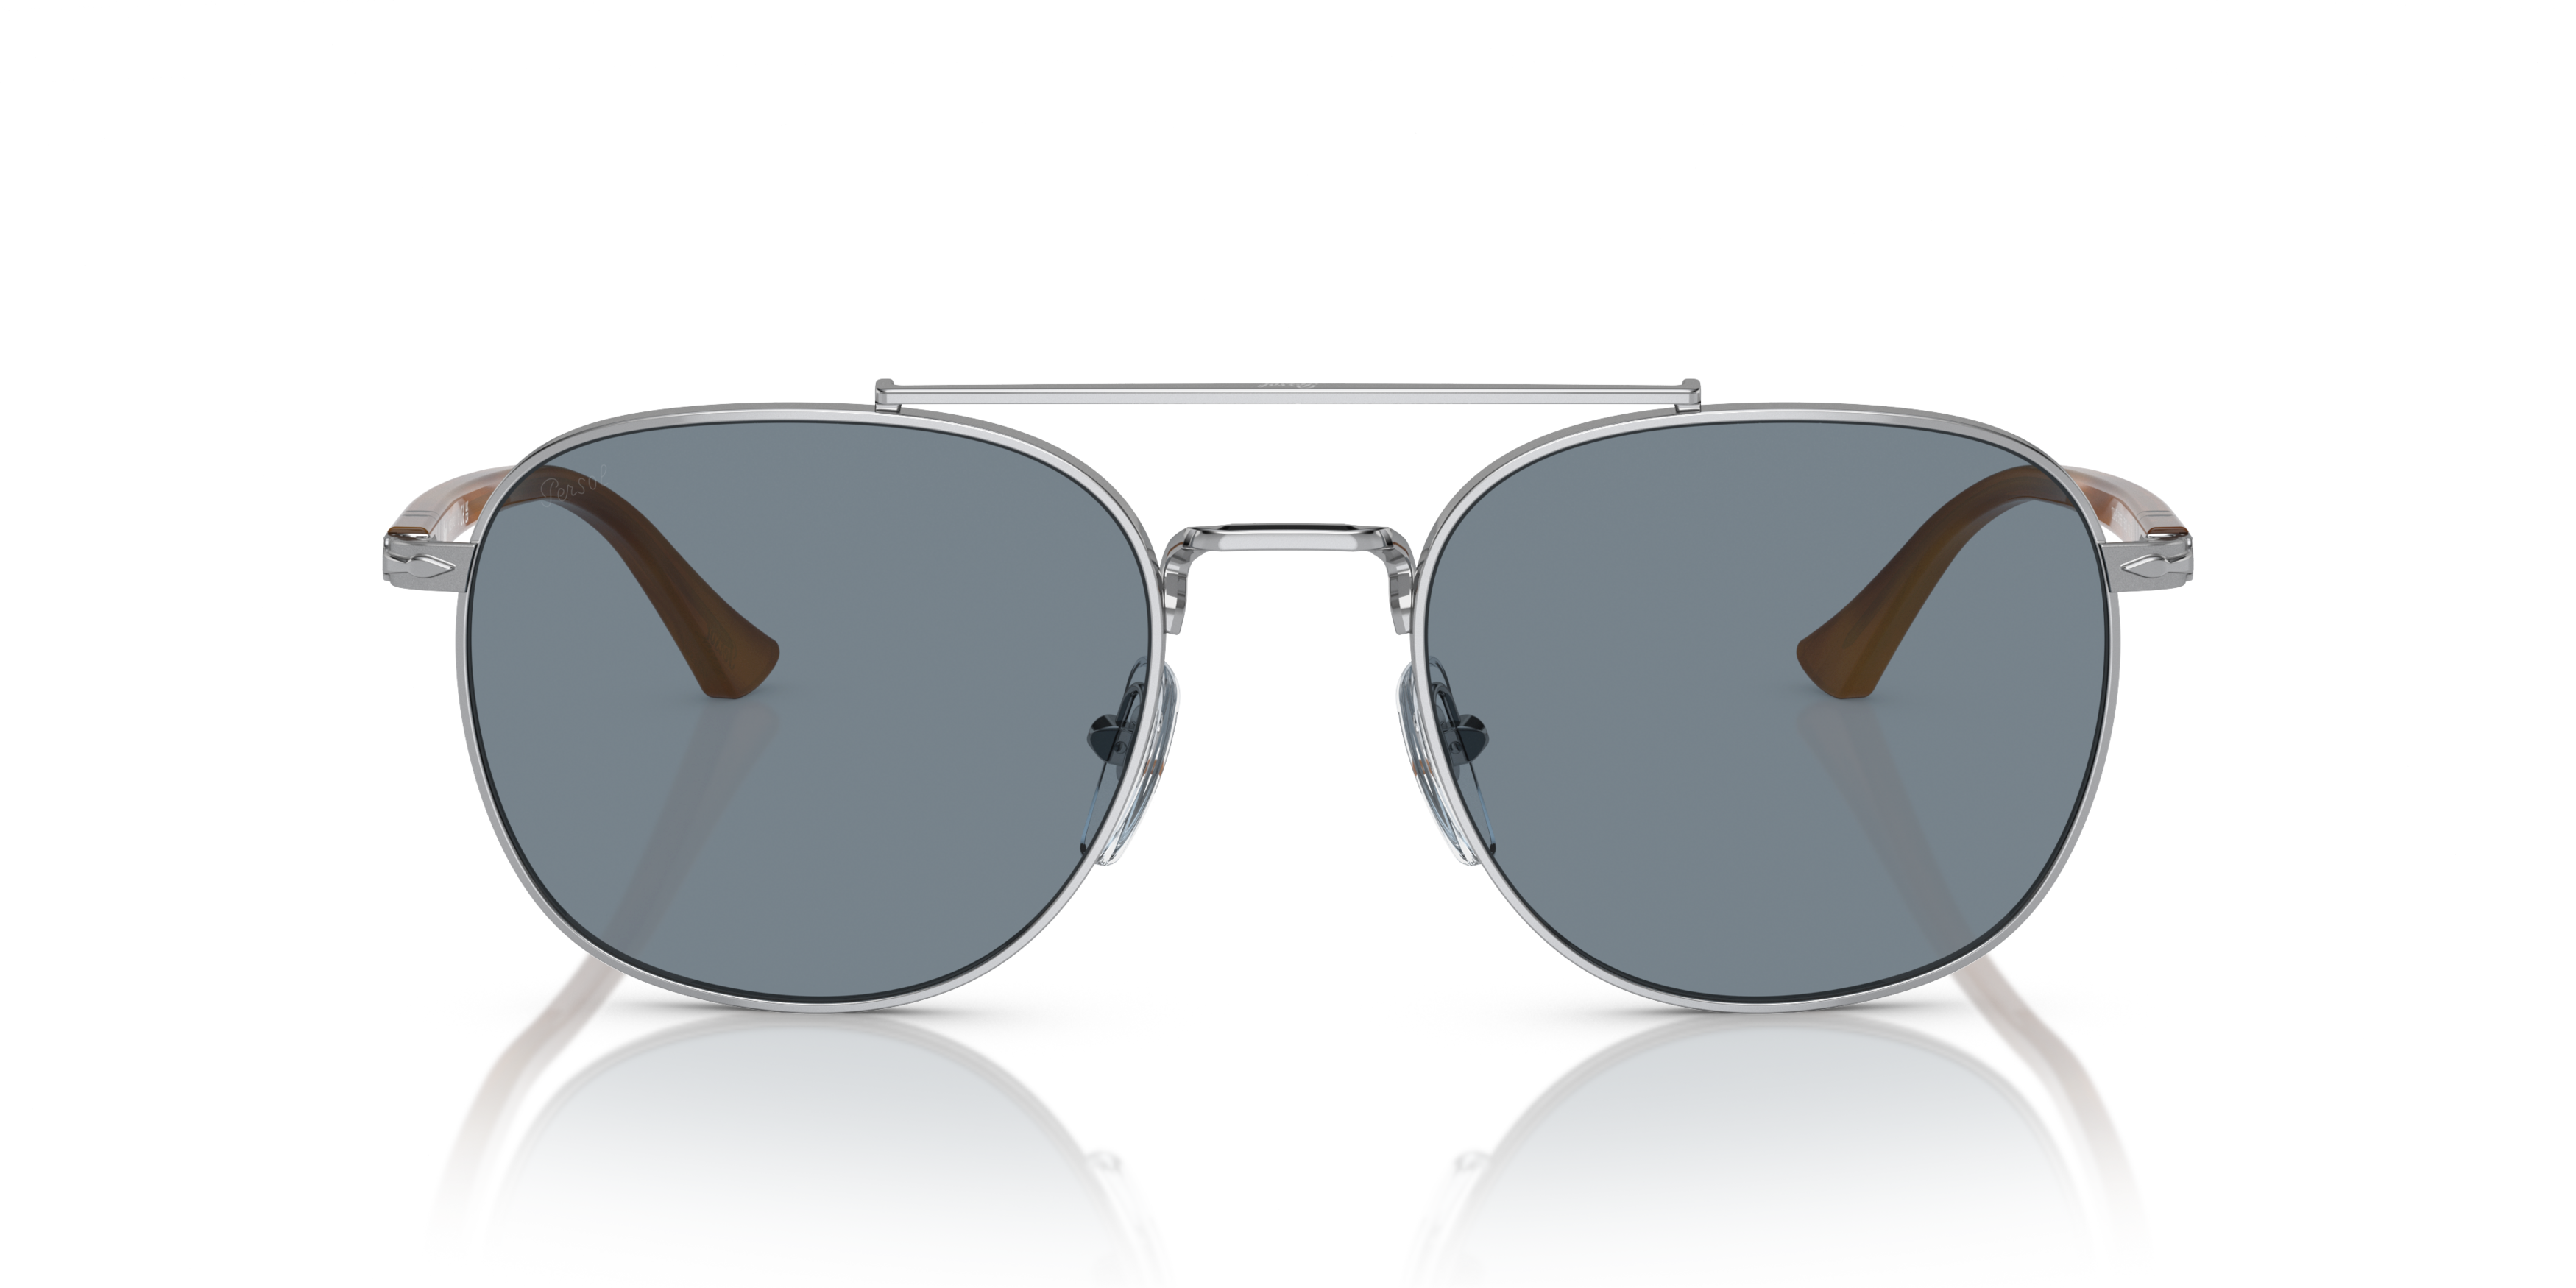 [products.image.front] PERSOL PO1006S 518/56